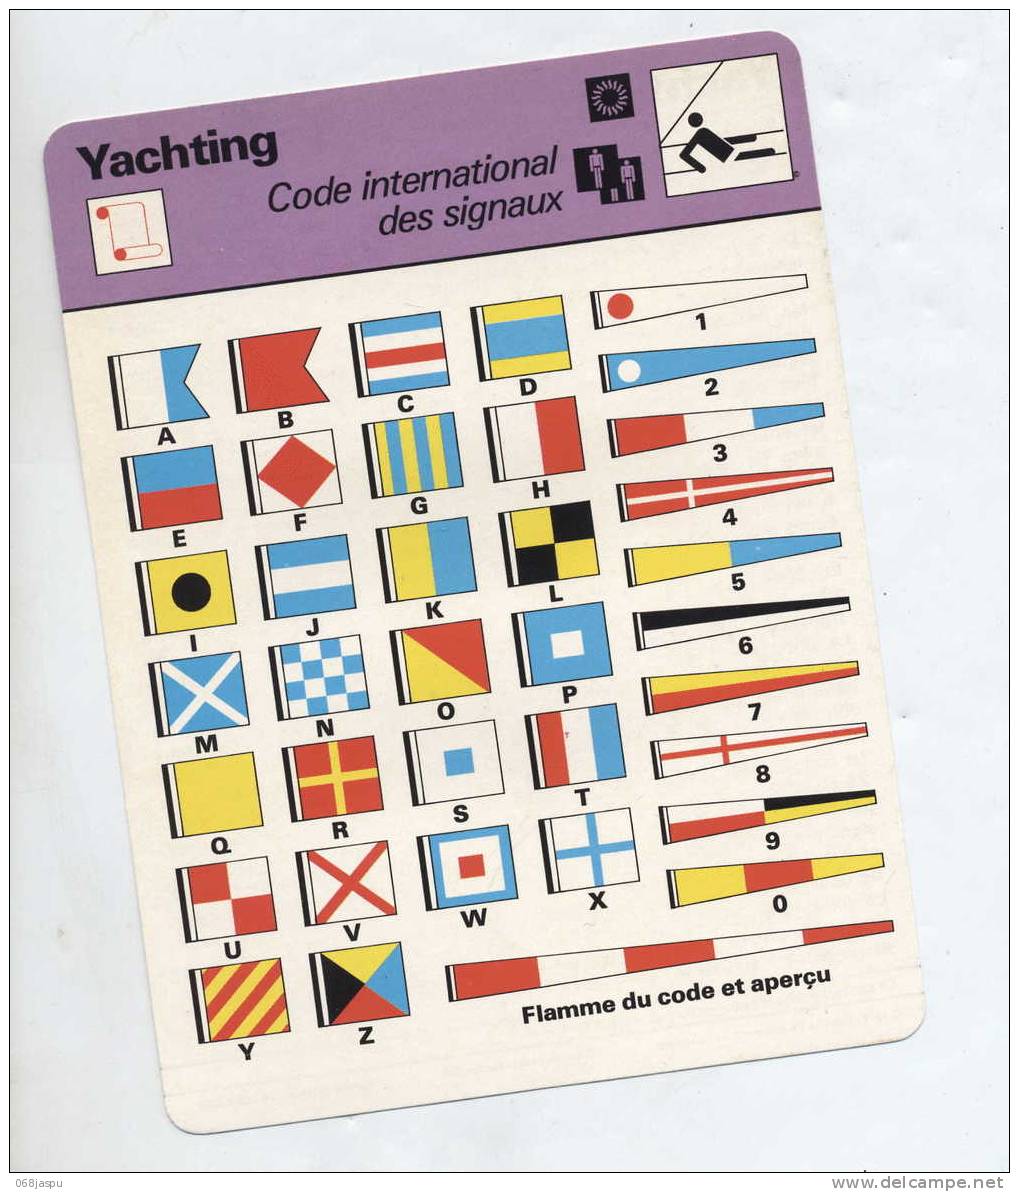 Fiche Yachting Signaux - Swimming